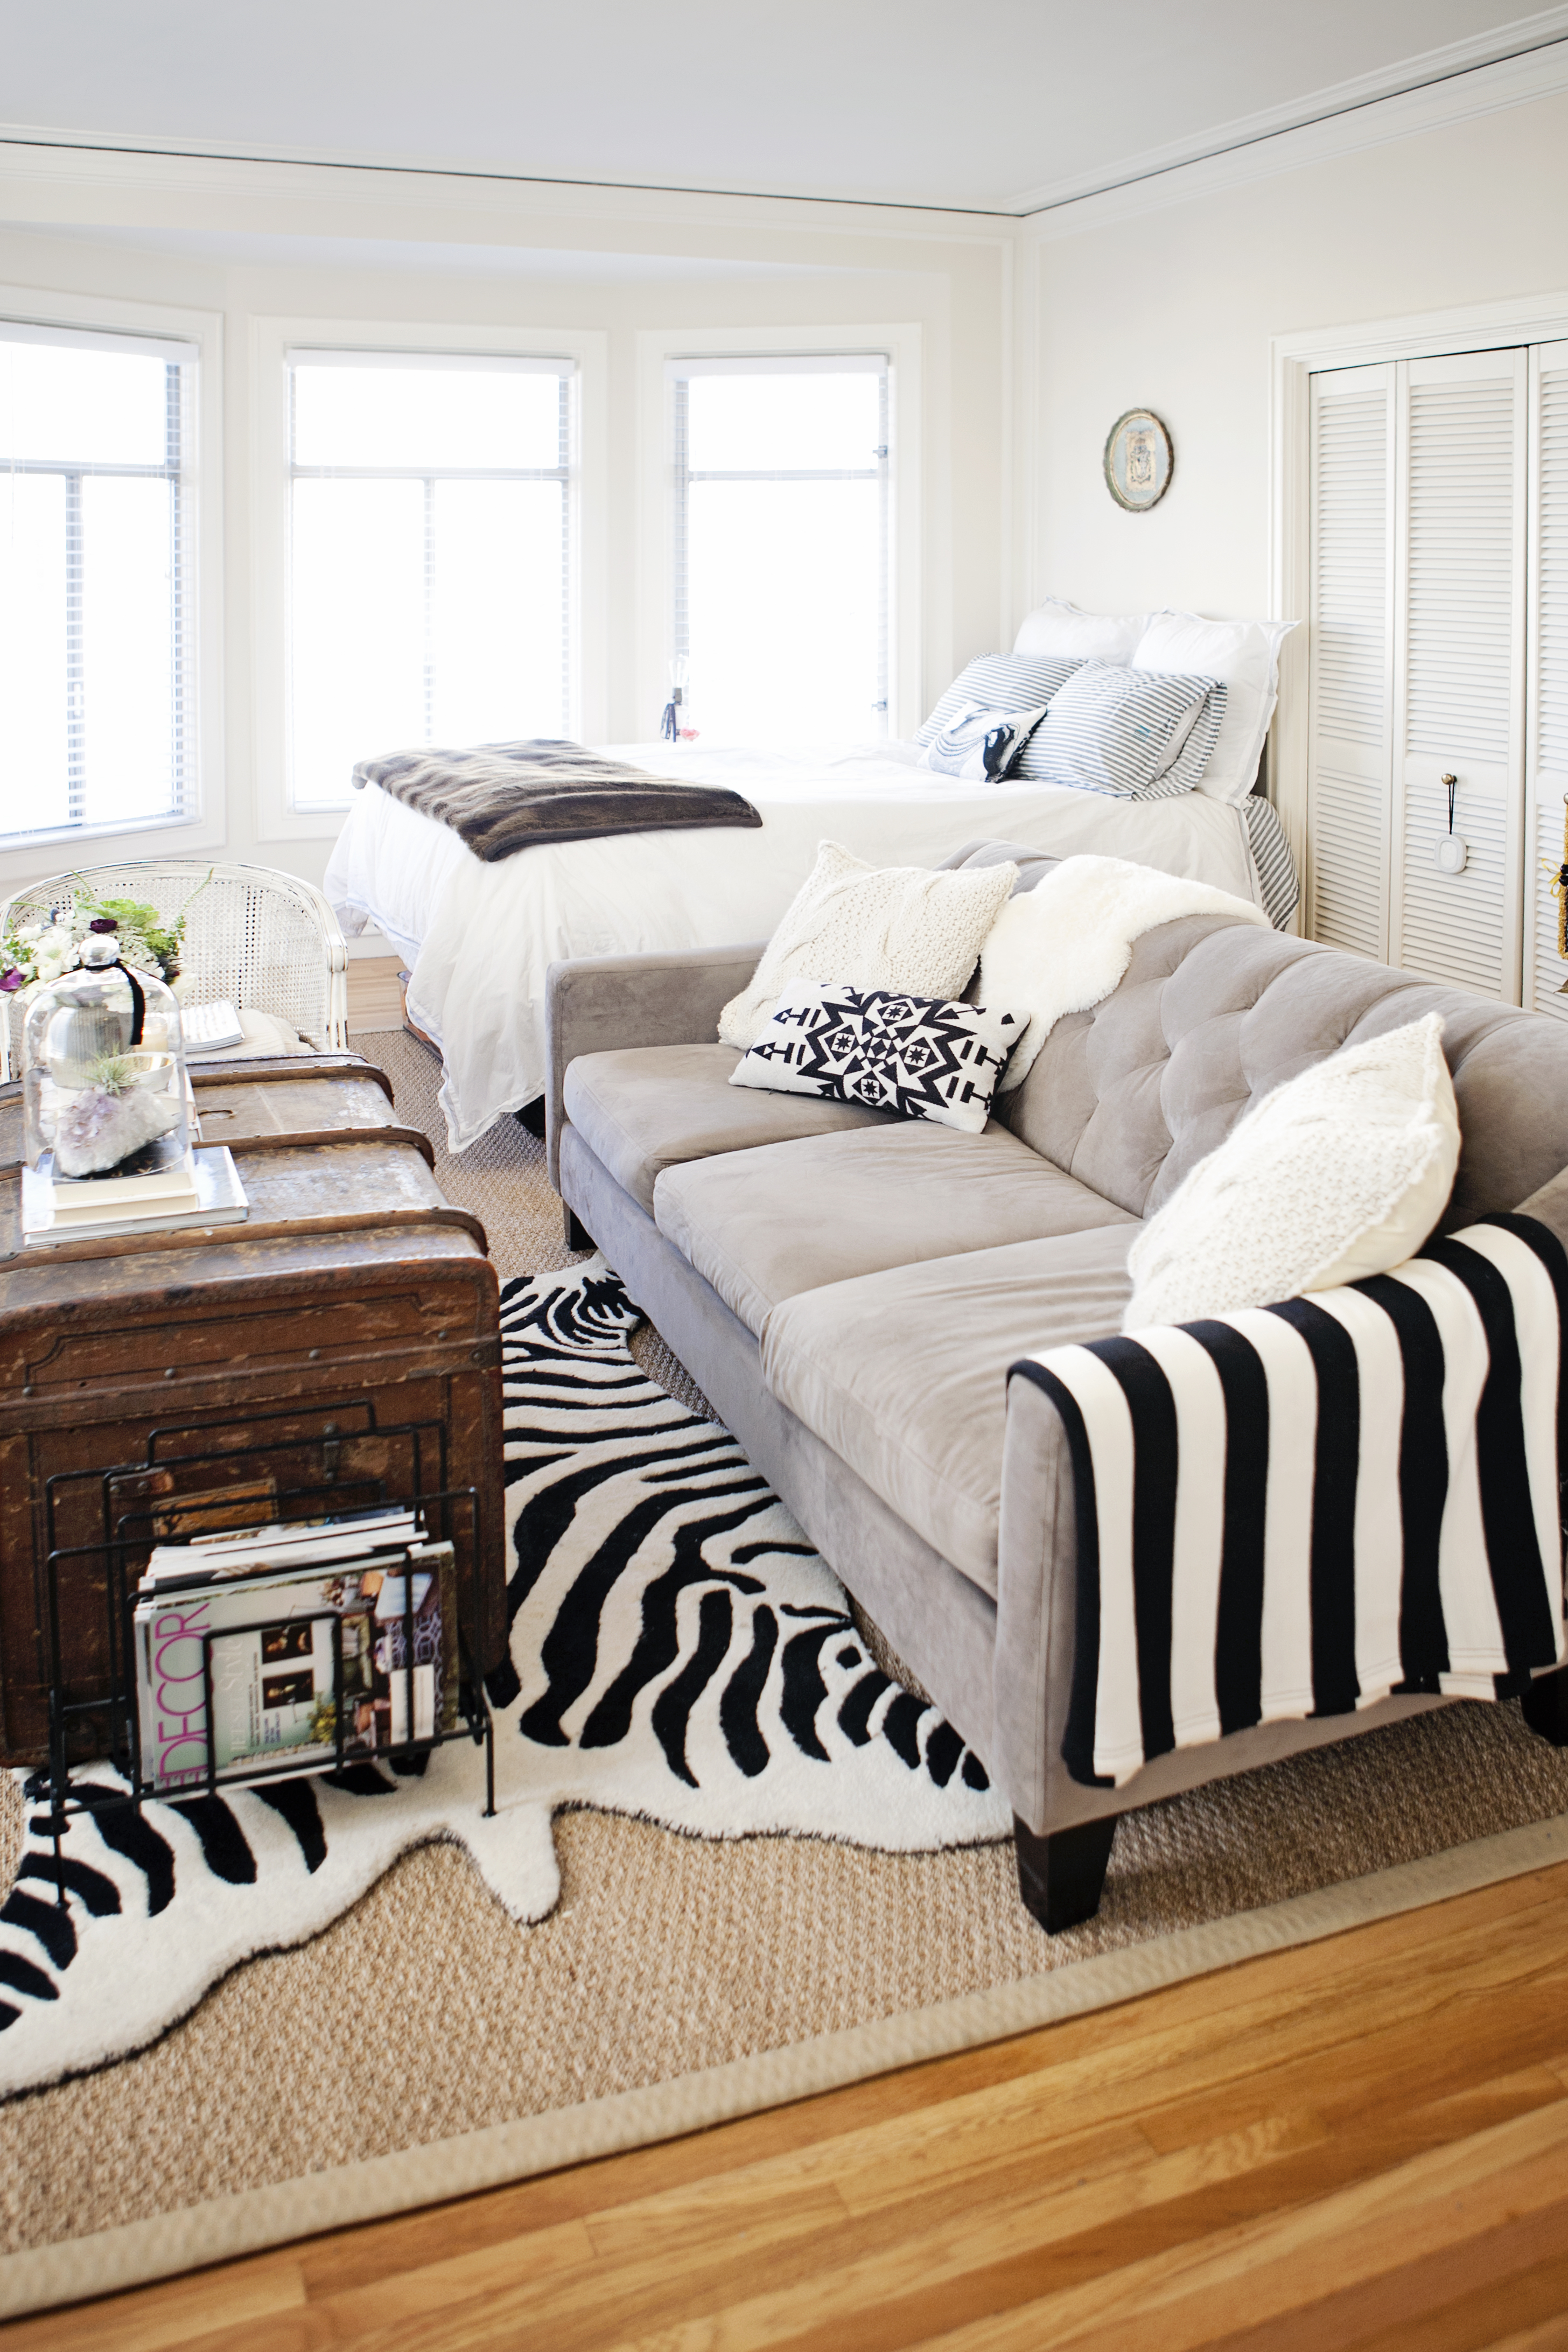 6 Tried And True Tips For Making Small Spaces More Livable